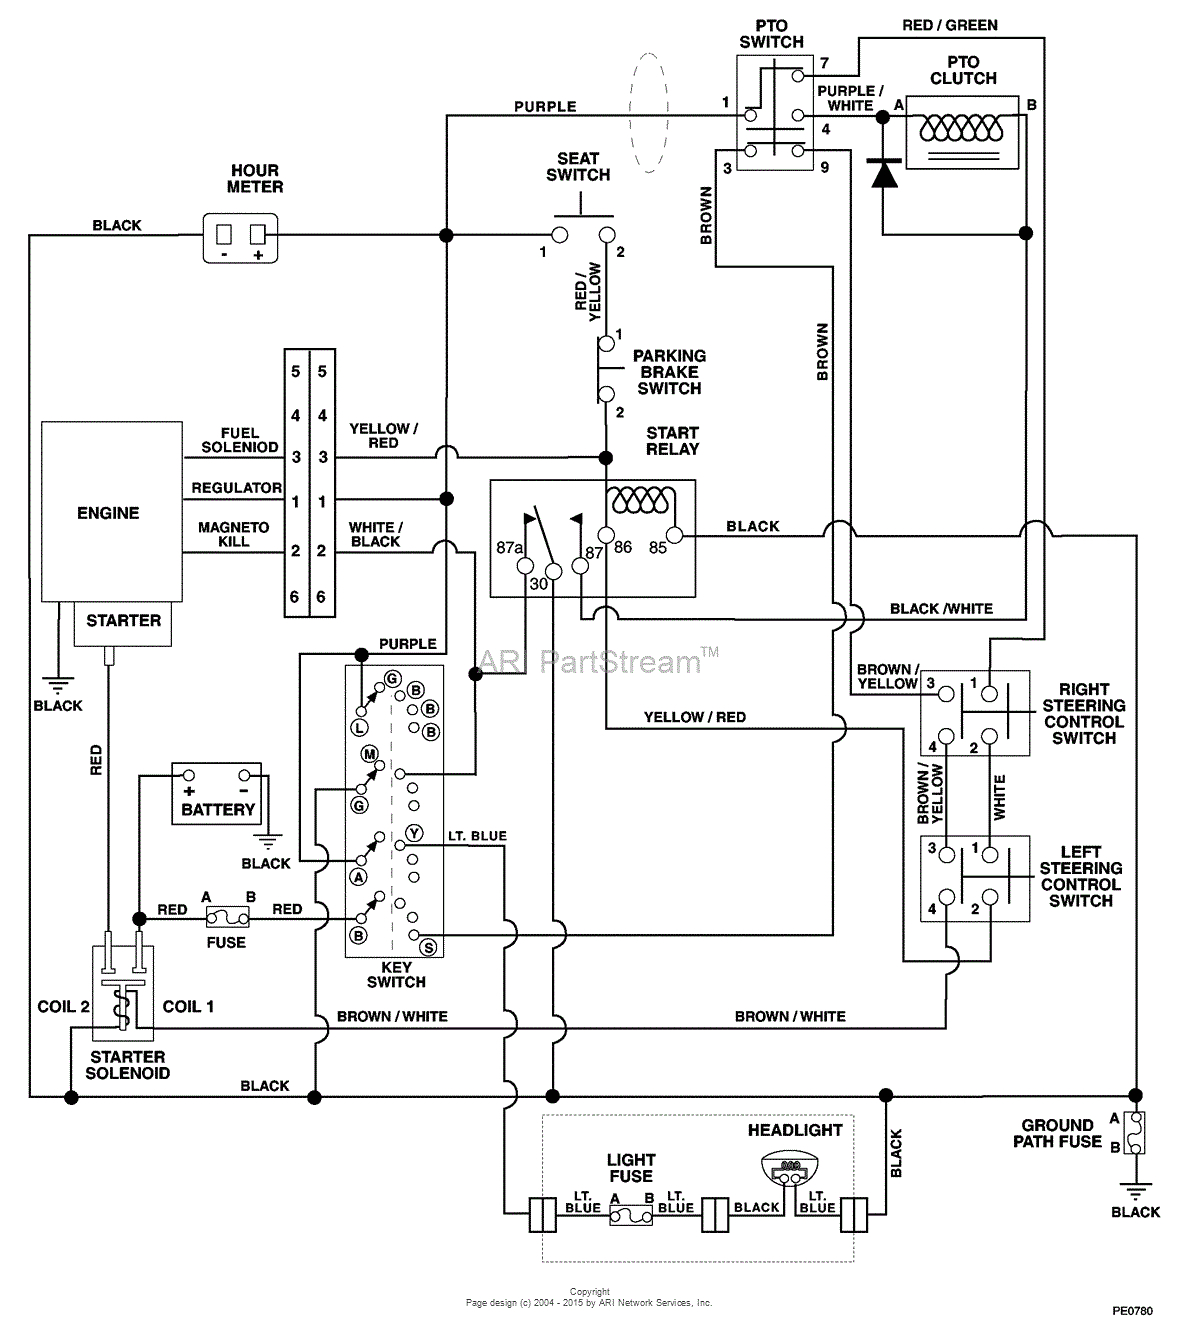 prong switch diagram for pinterest wiring diagram blog apexis wiring diagram